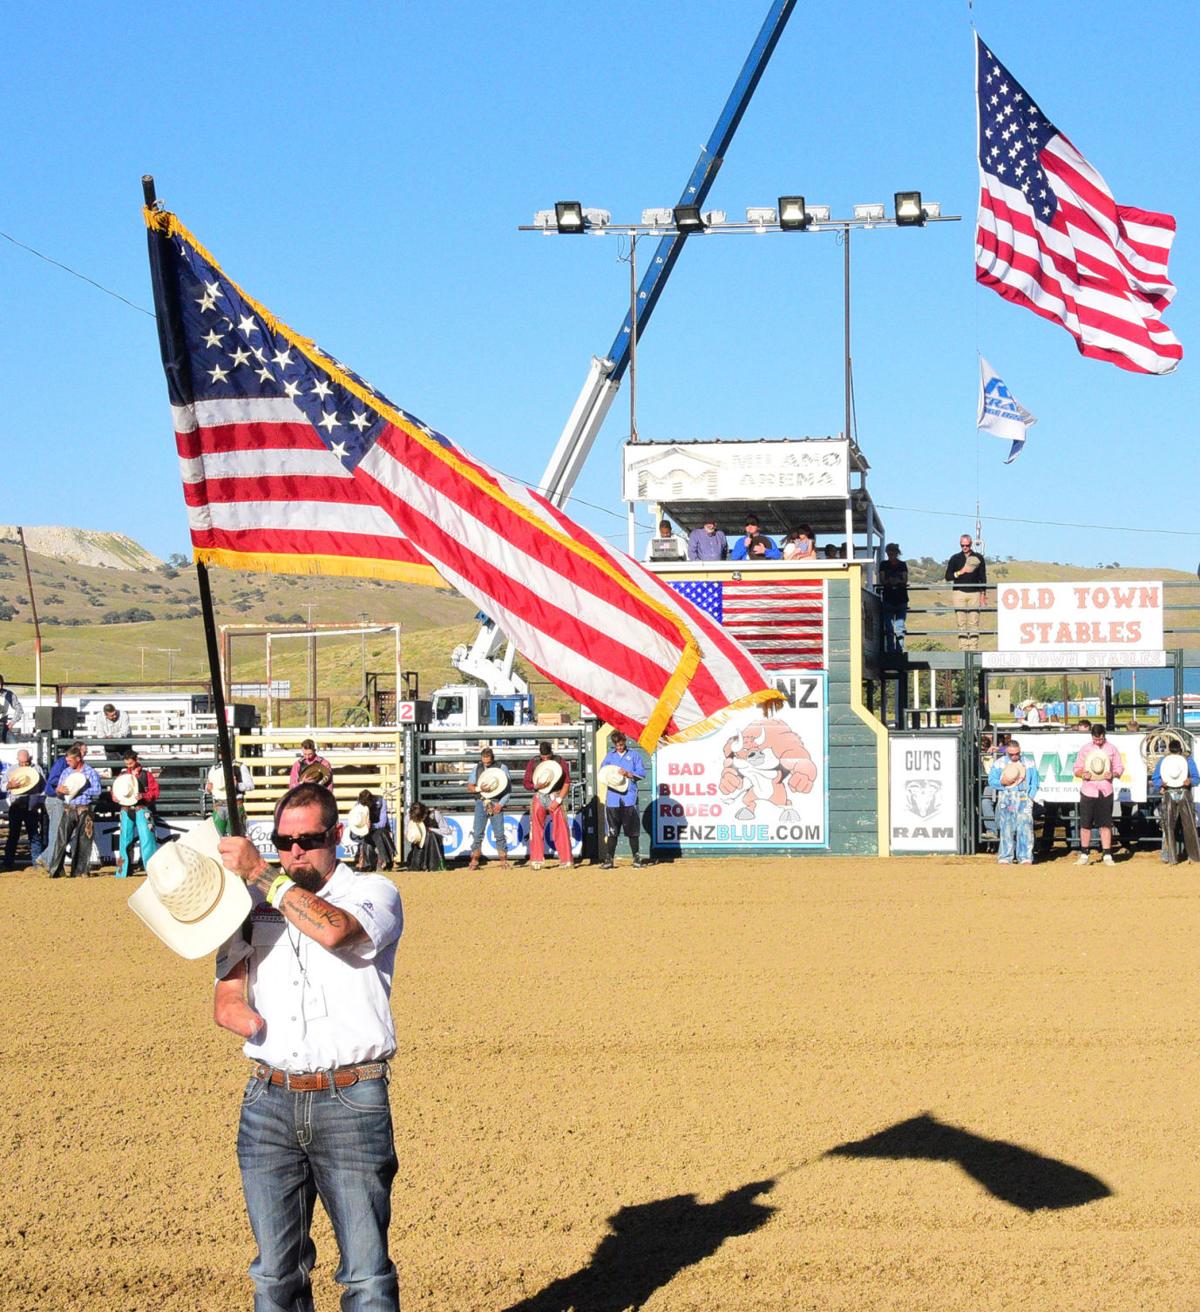 PHOTO GALLERY Benz Bad Bulls take to the rodeo grounds for July 4th